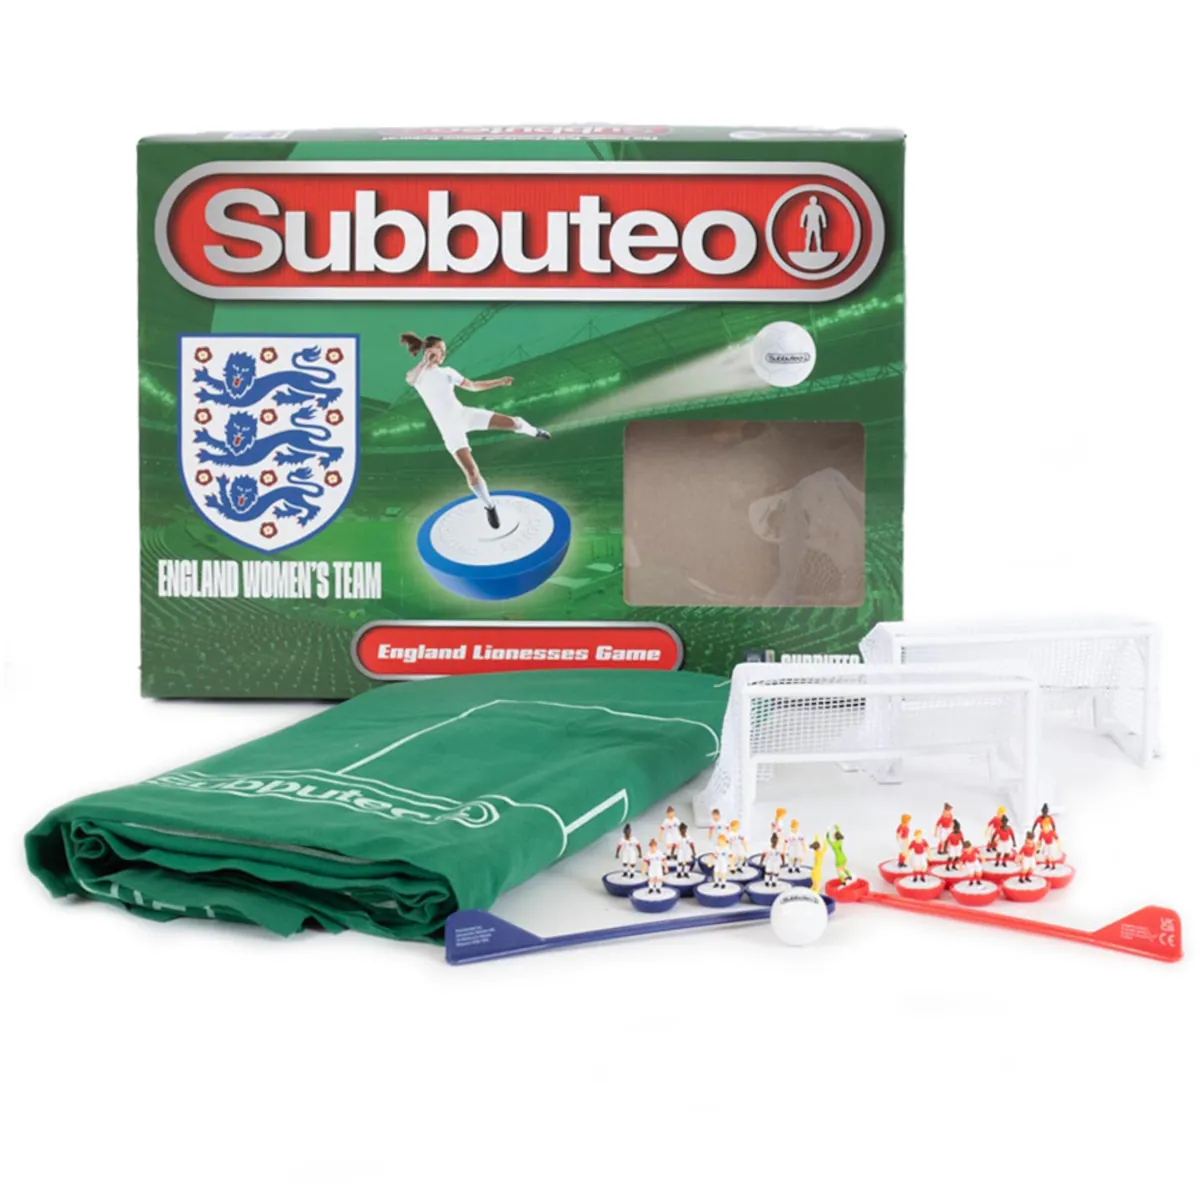 TM-05274 England F.A. Women's Team Lionesses Edition Subbuteo Main Table Football Game